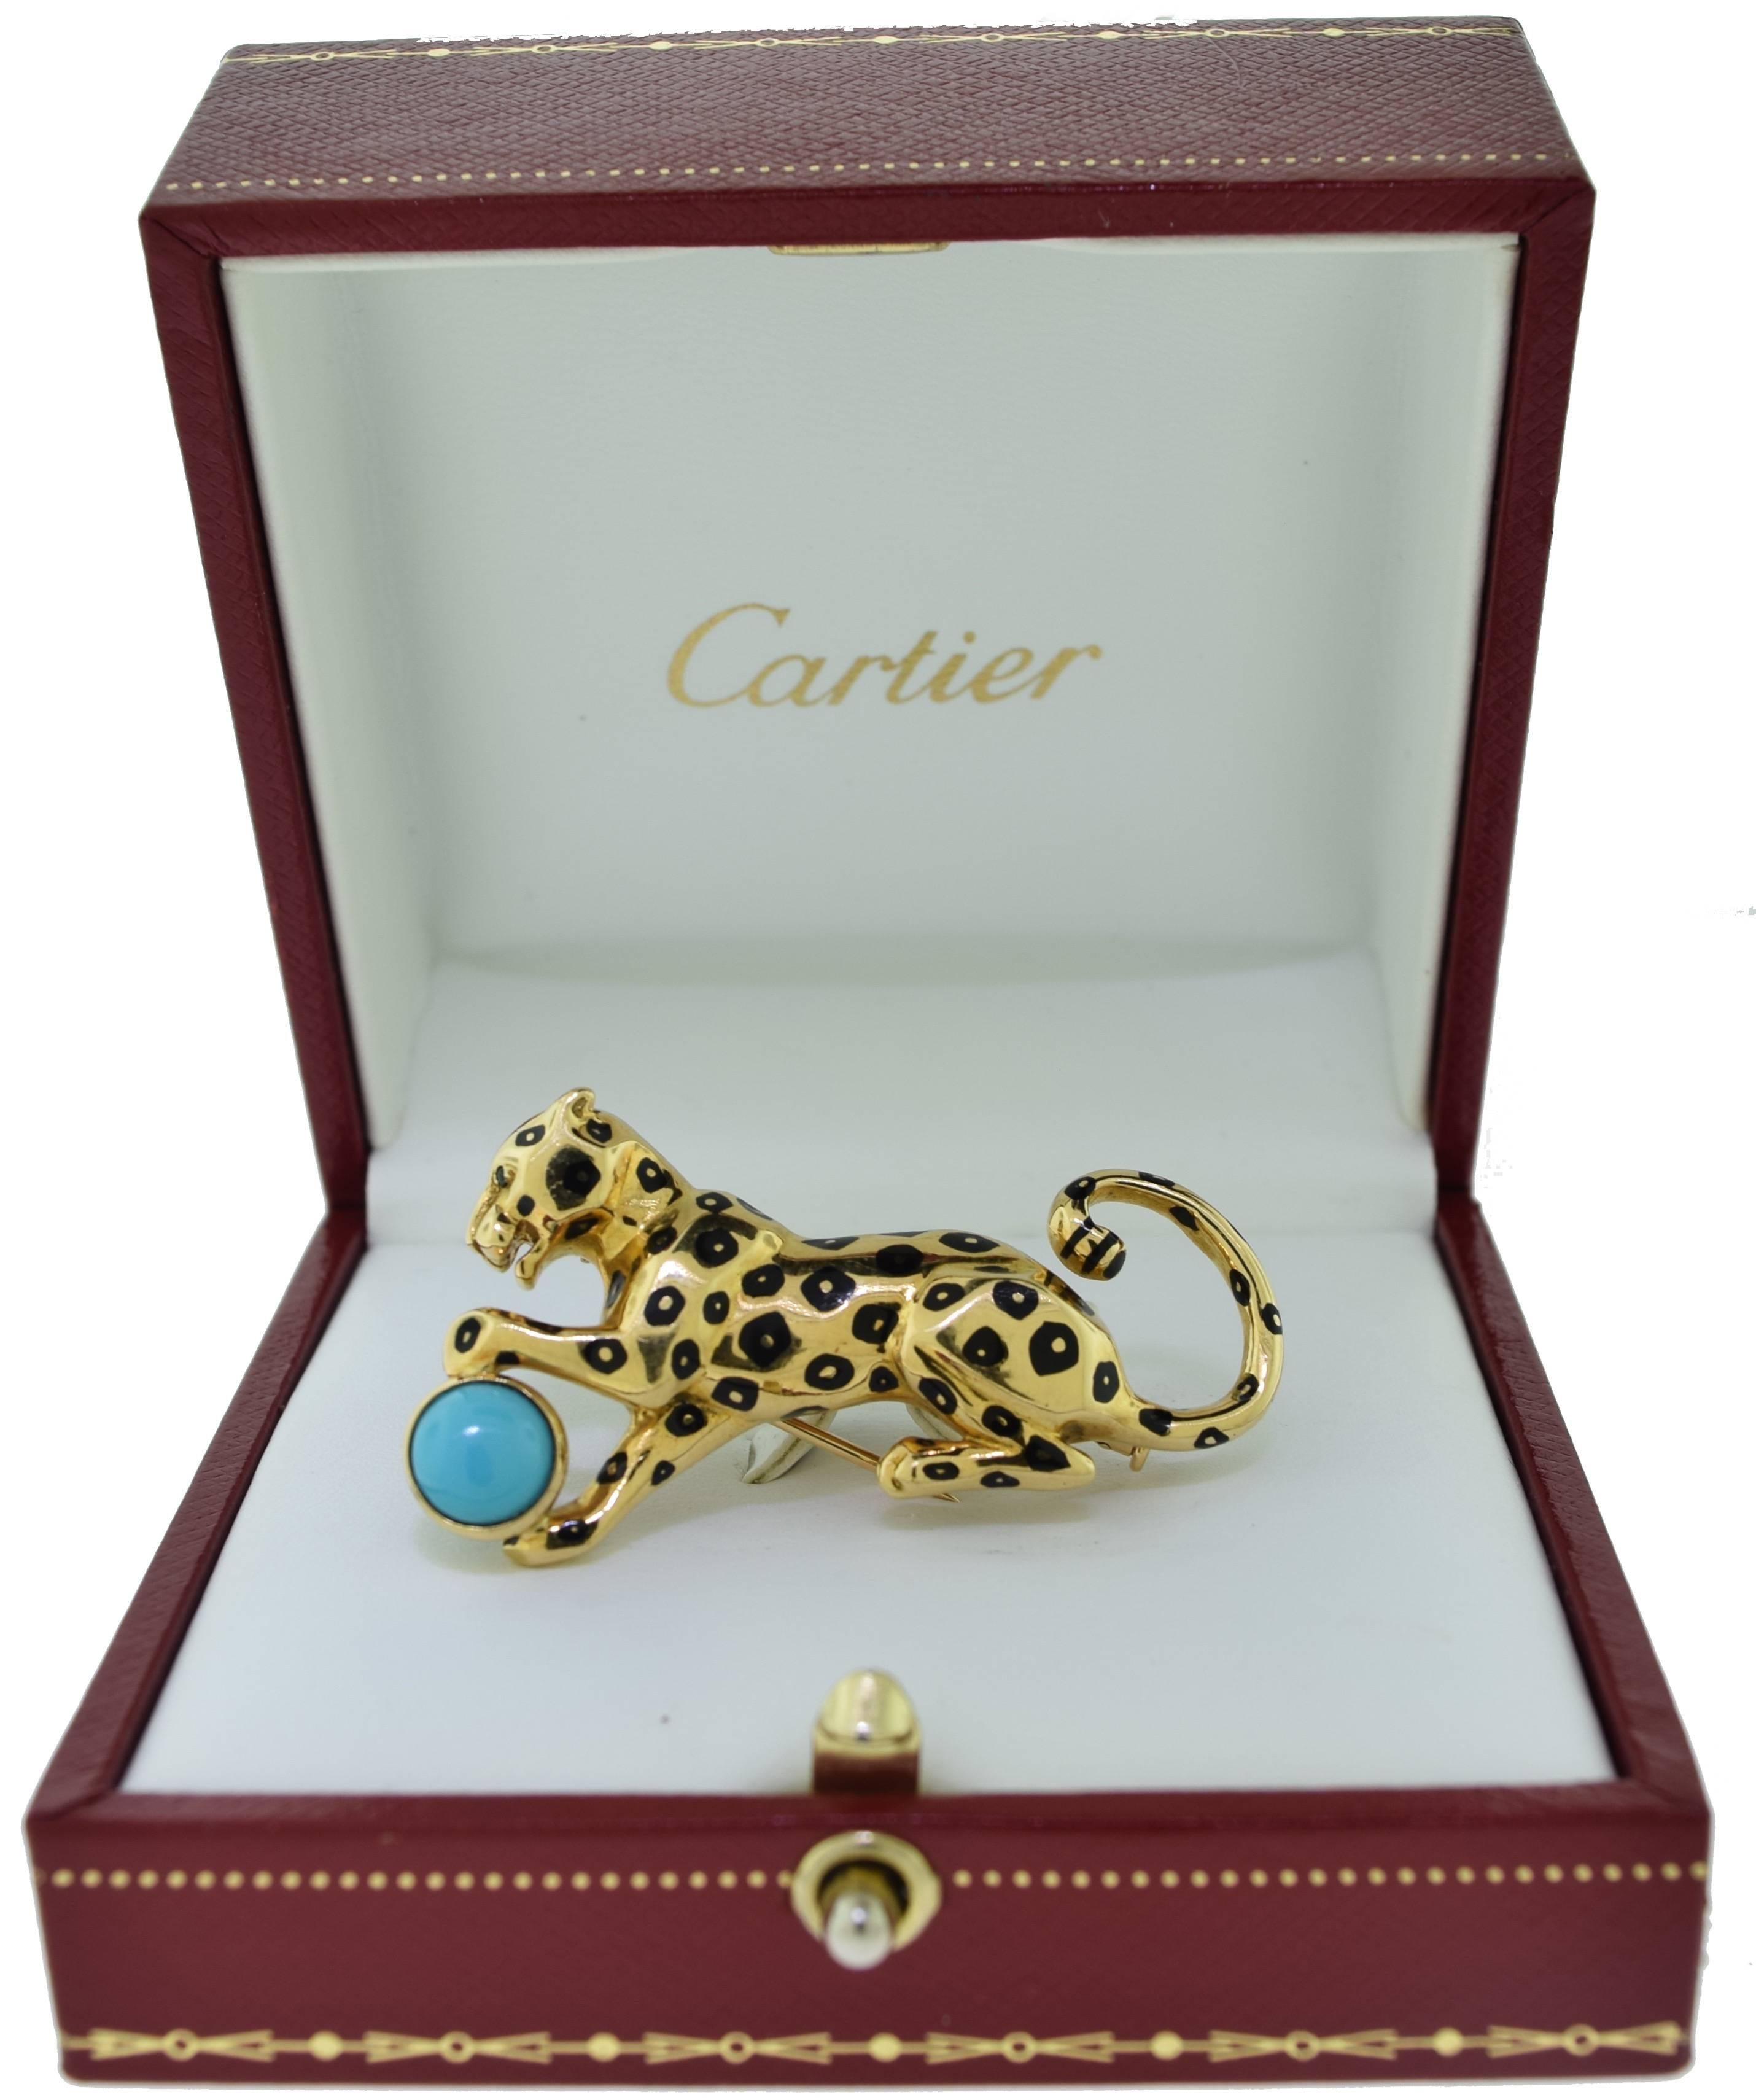 DESIGNER: Cartier
METAL: Yellow Gold
METAL PURITY: 18k
GEMSTONE: Turquoise
NON-METAL MATERIAL: Black Enamel
TOTAL ITEM WEIGHT (GRAMS): 17.17
LENGTH: 2.08 inches
WIDTH: 1.21 inches
THICKNESS: 0.52 inches
HALLMARK: 750, SERIAL